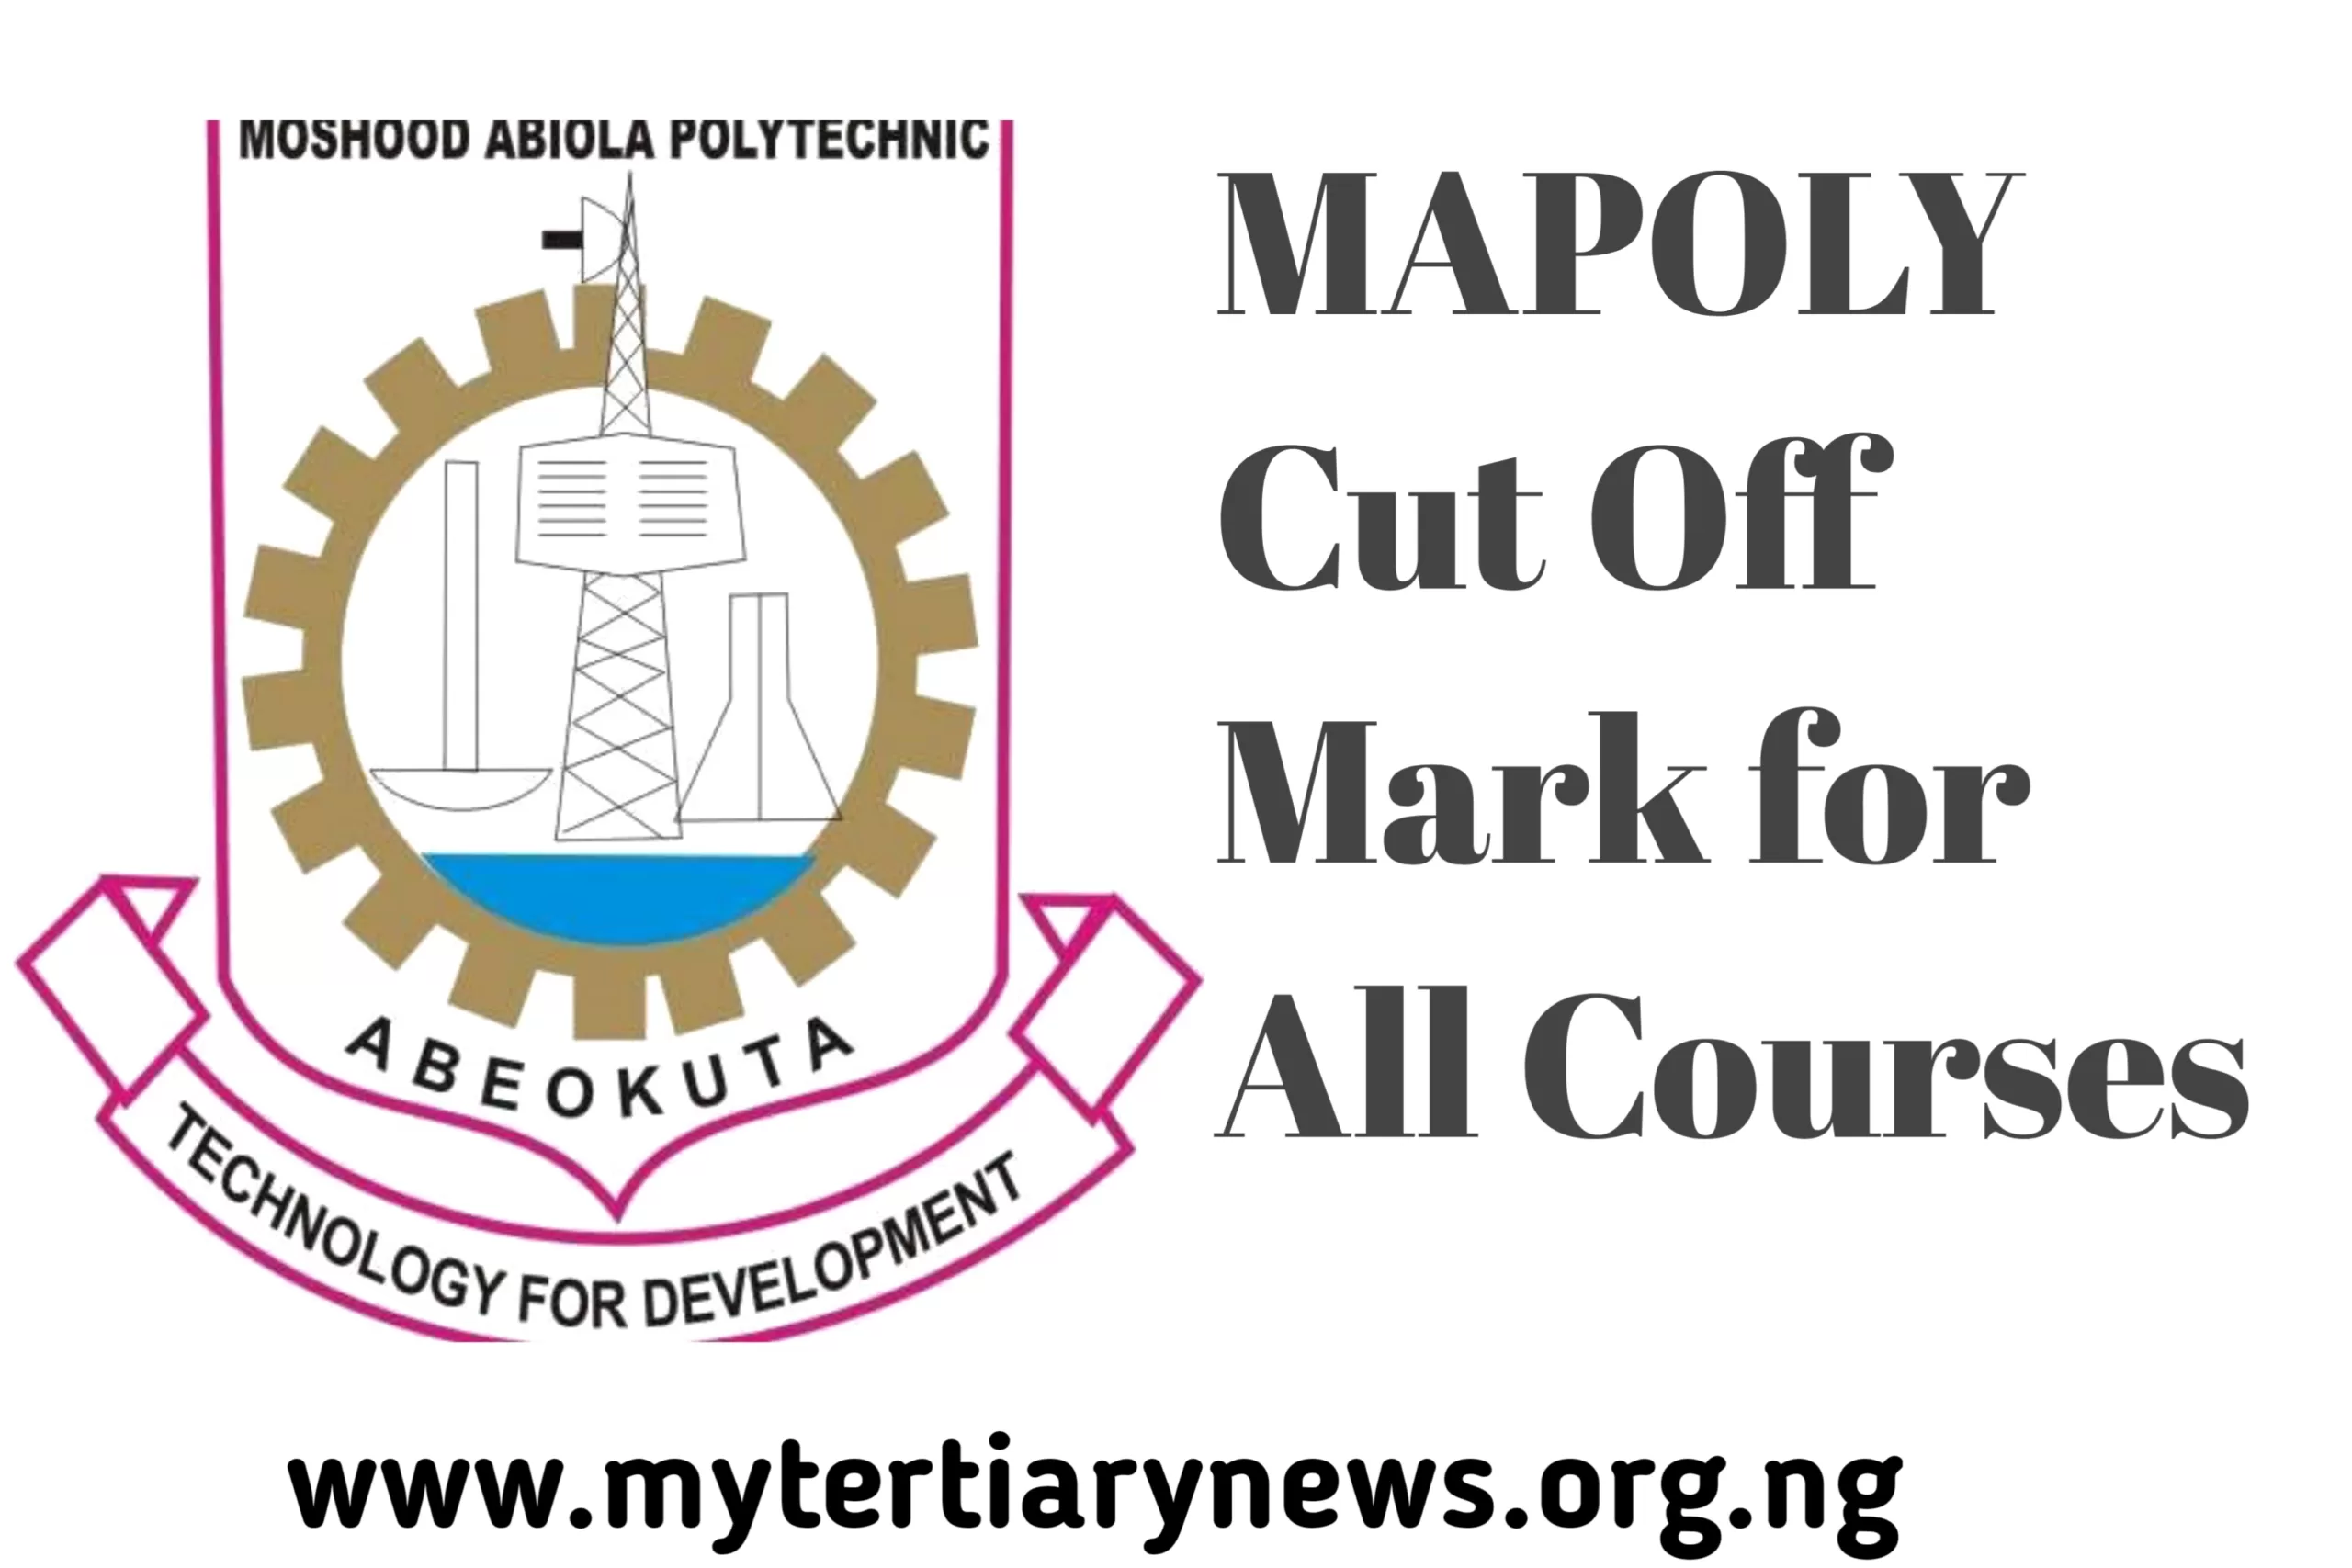 MAPOLY Image || MAPOLY Cut Off Mark for All Courses